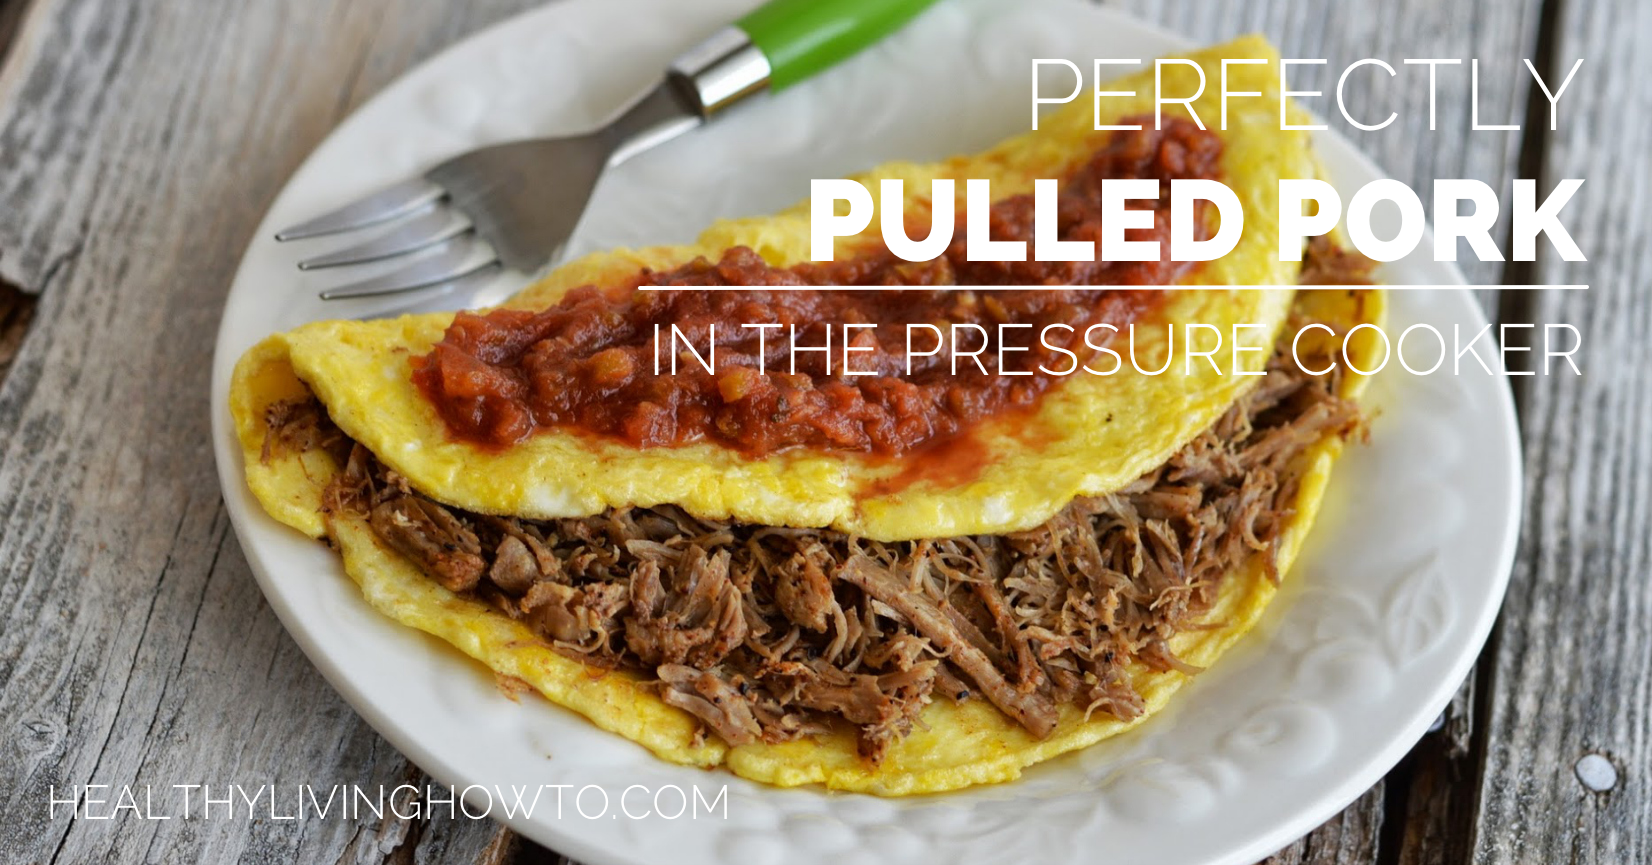 Perfectly Pulled Pork In The Pressure Cooker | healthylivinghowto.com